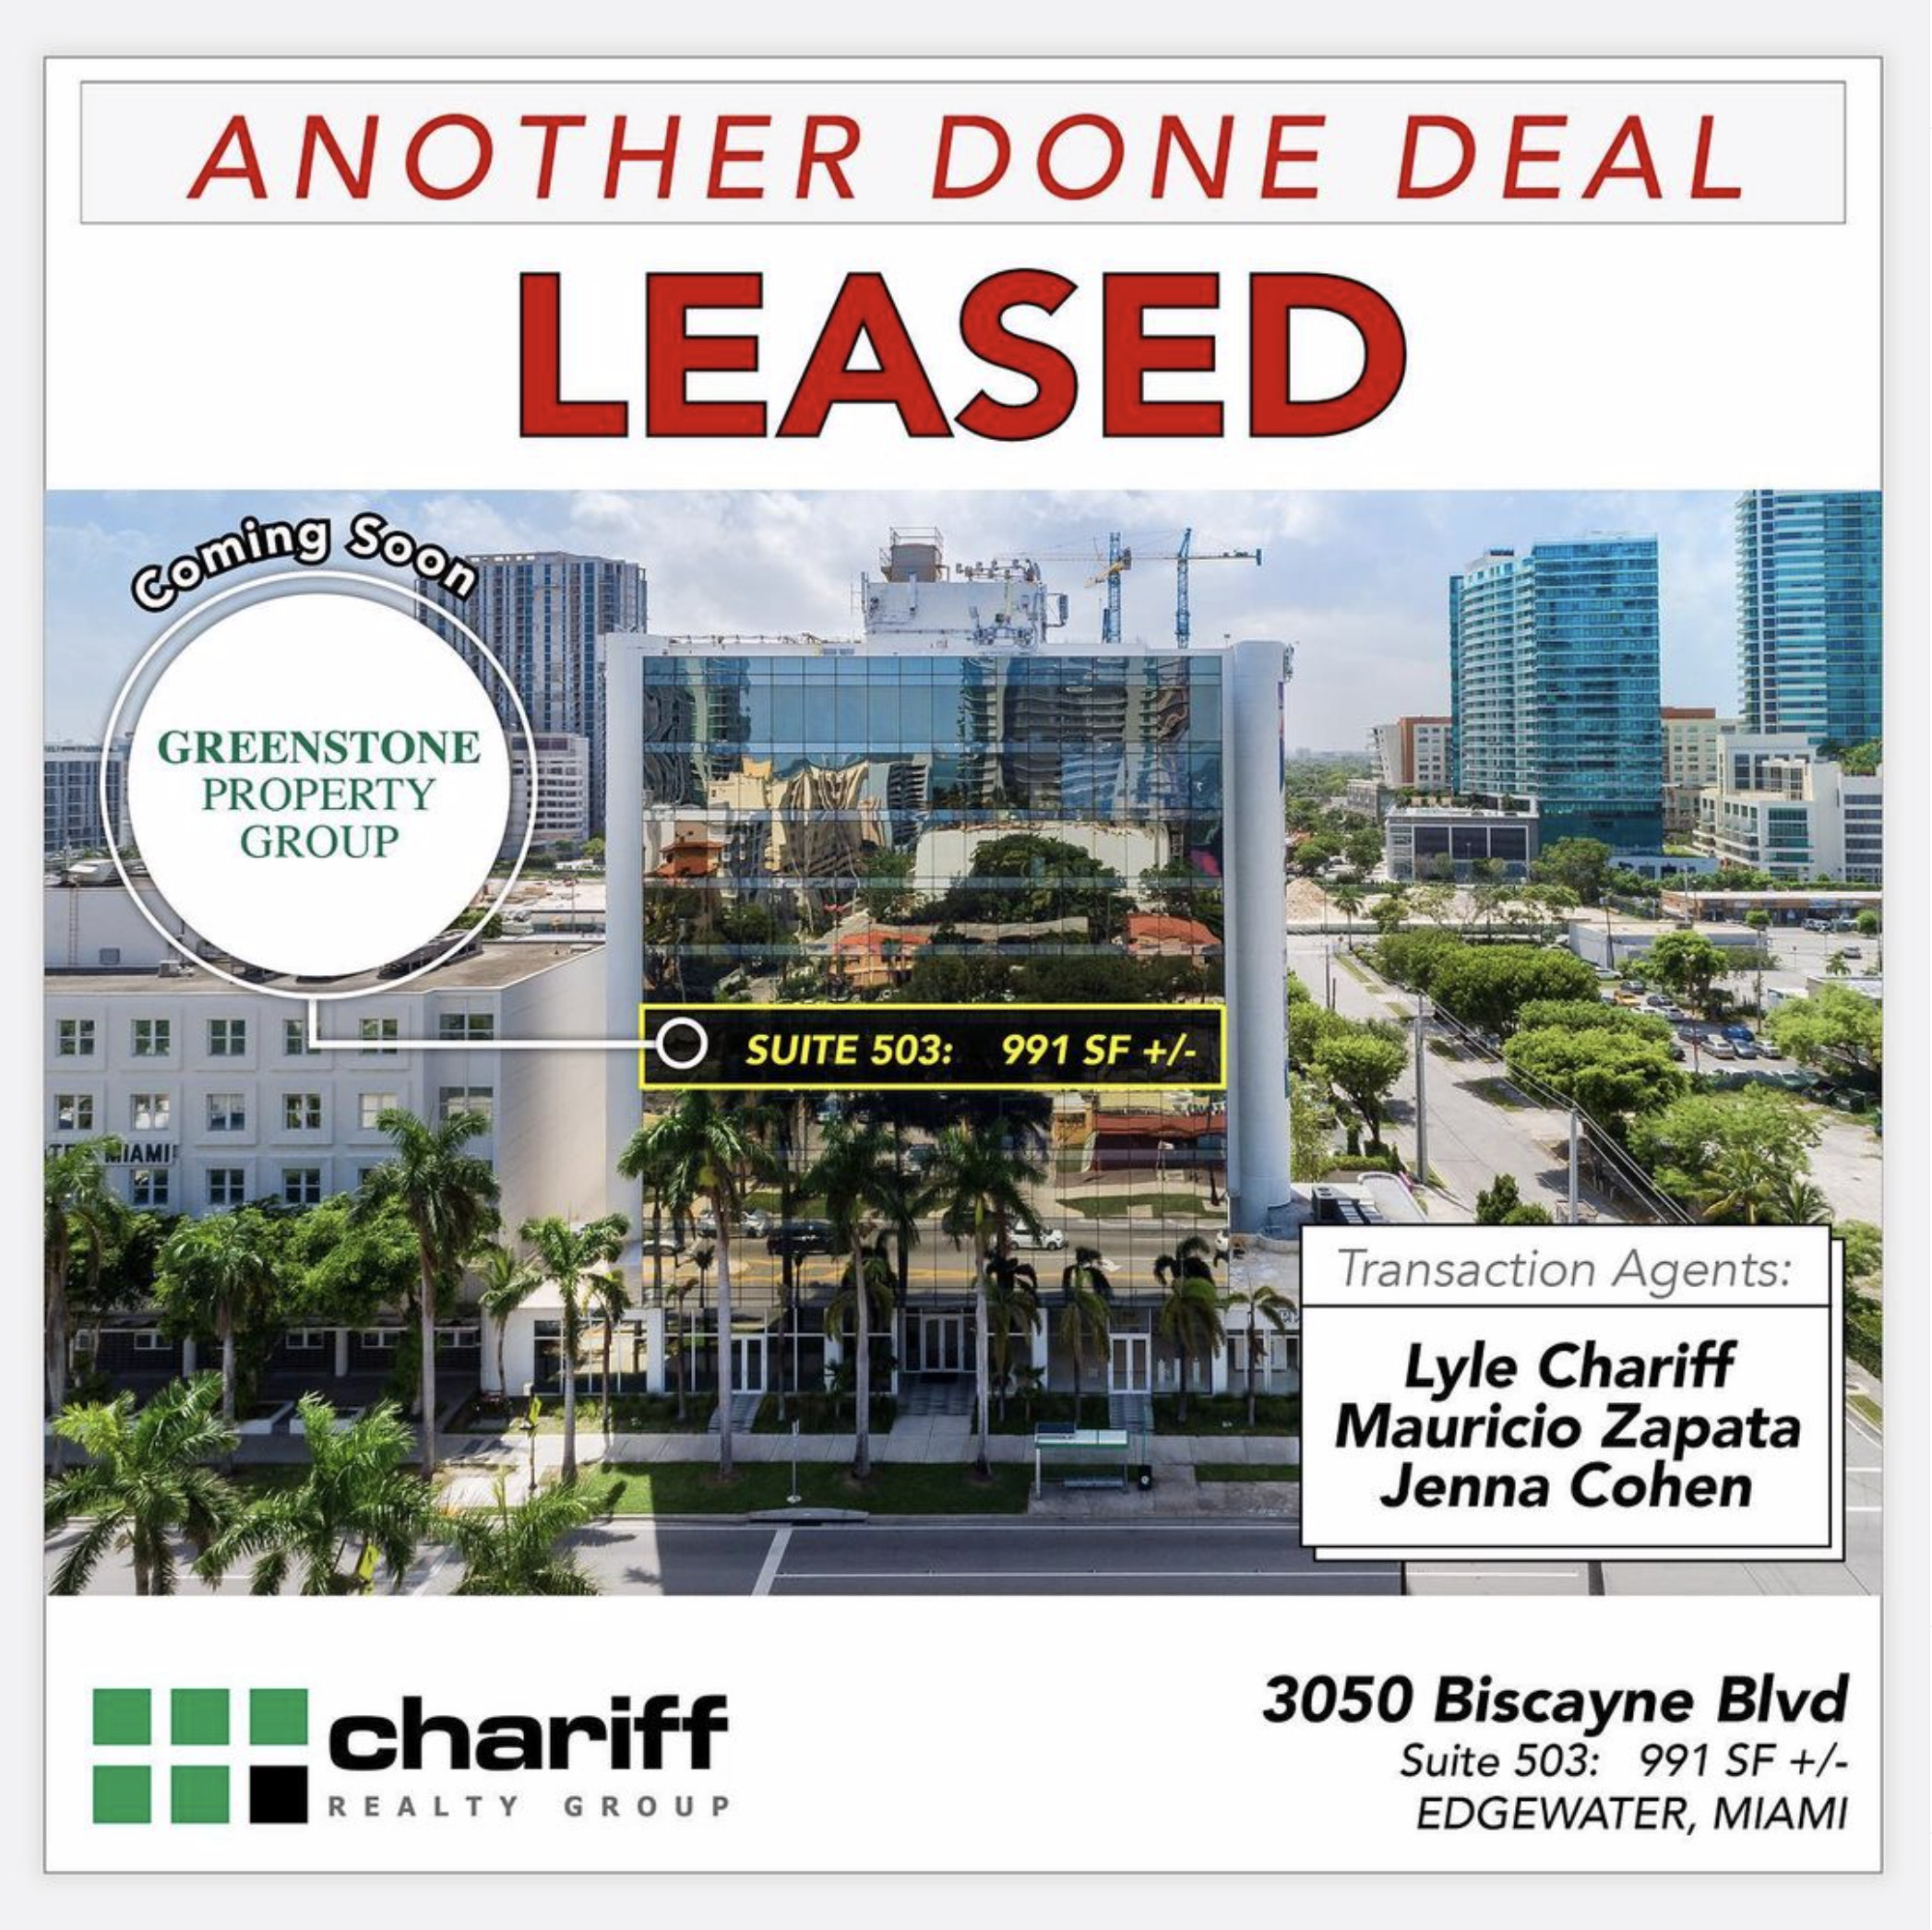 3050 Biscayne Blvd suite 503 - Another Done Deal - Leased - Edgewater - Miami-Florida-33137-Chariff Realty Group